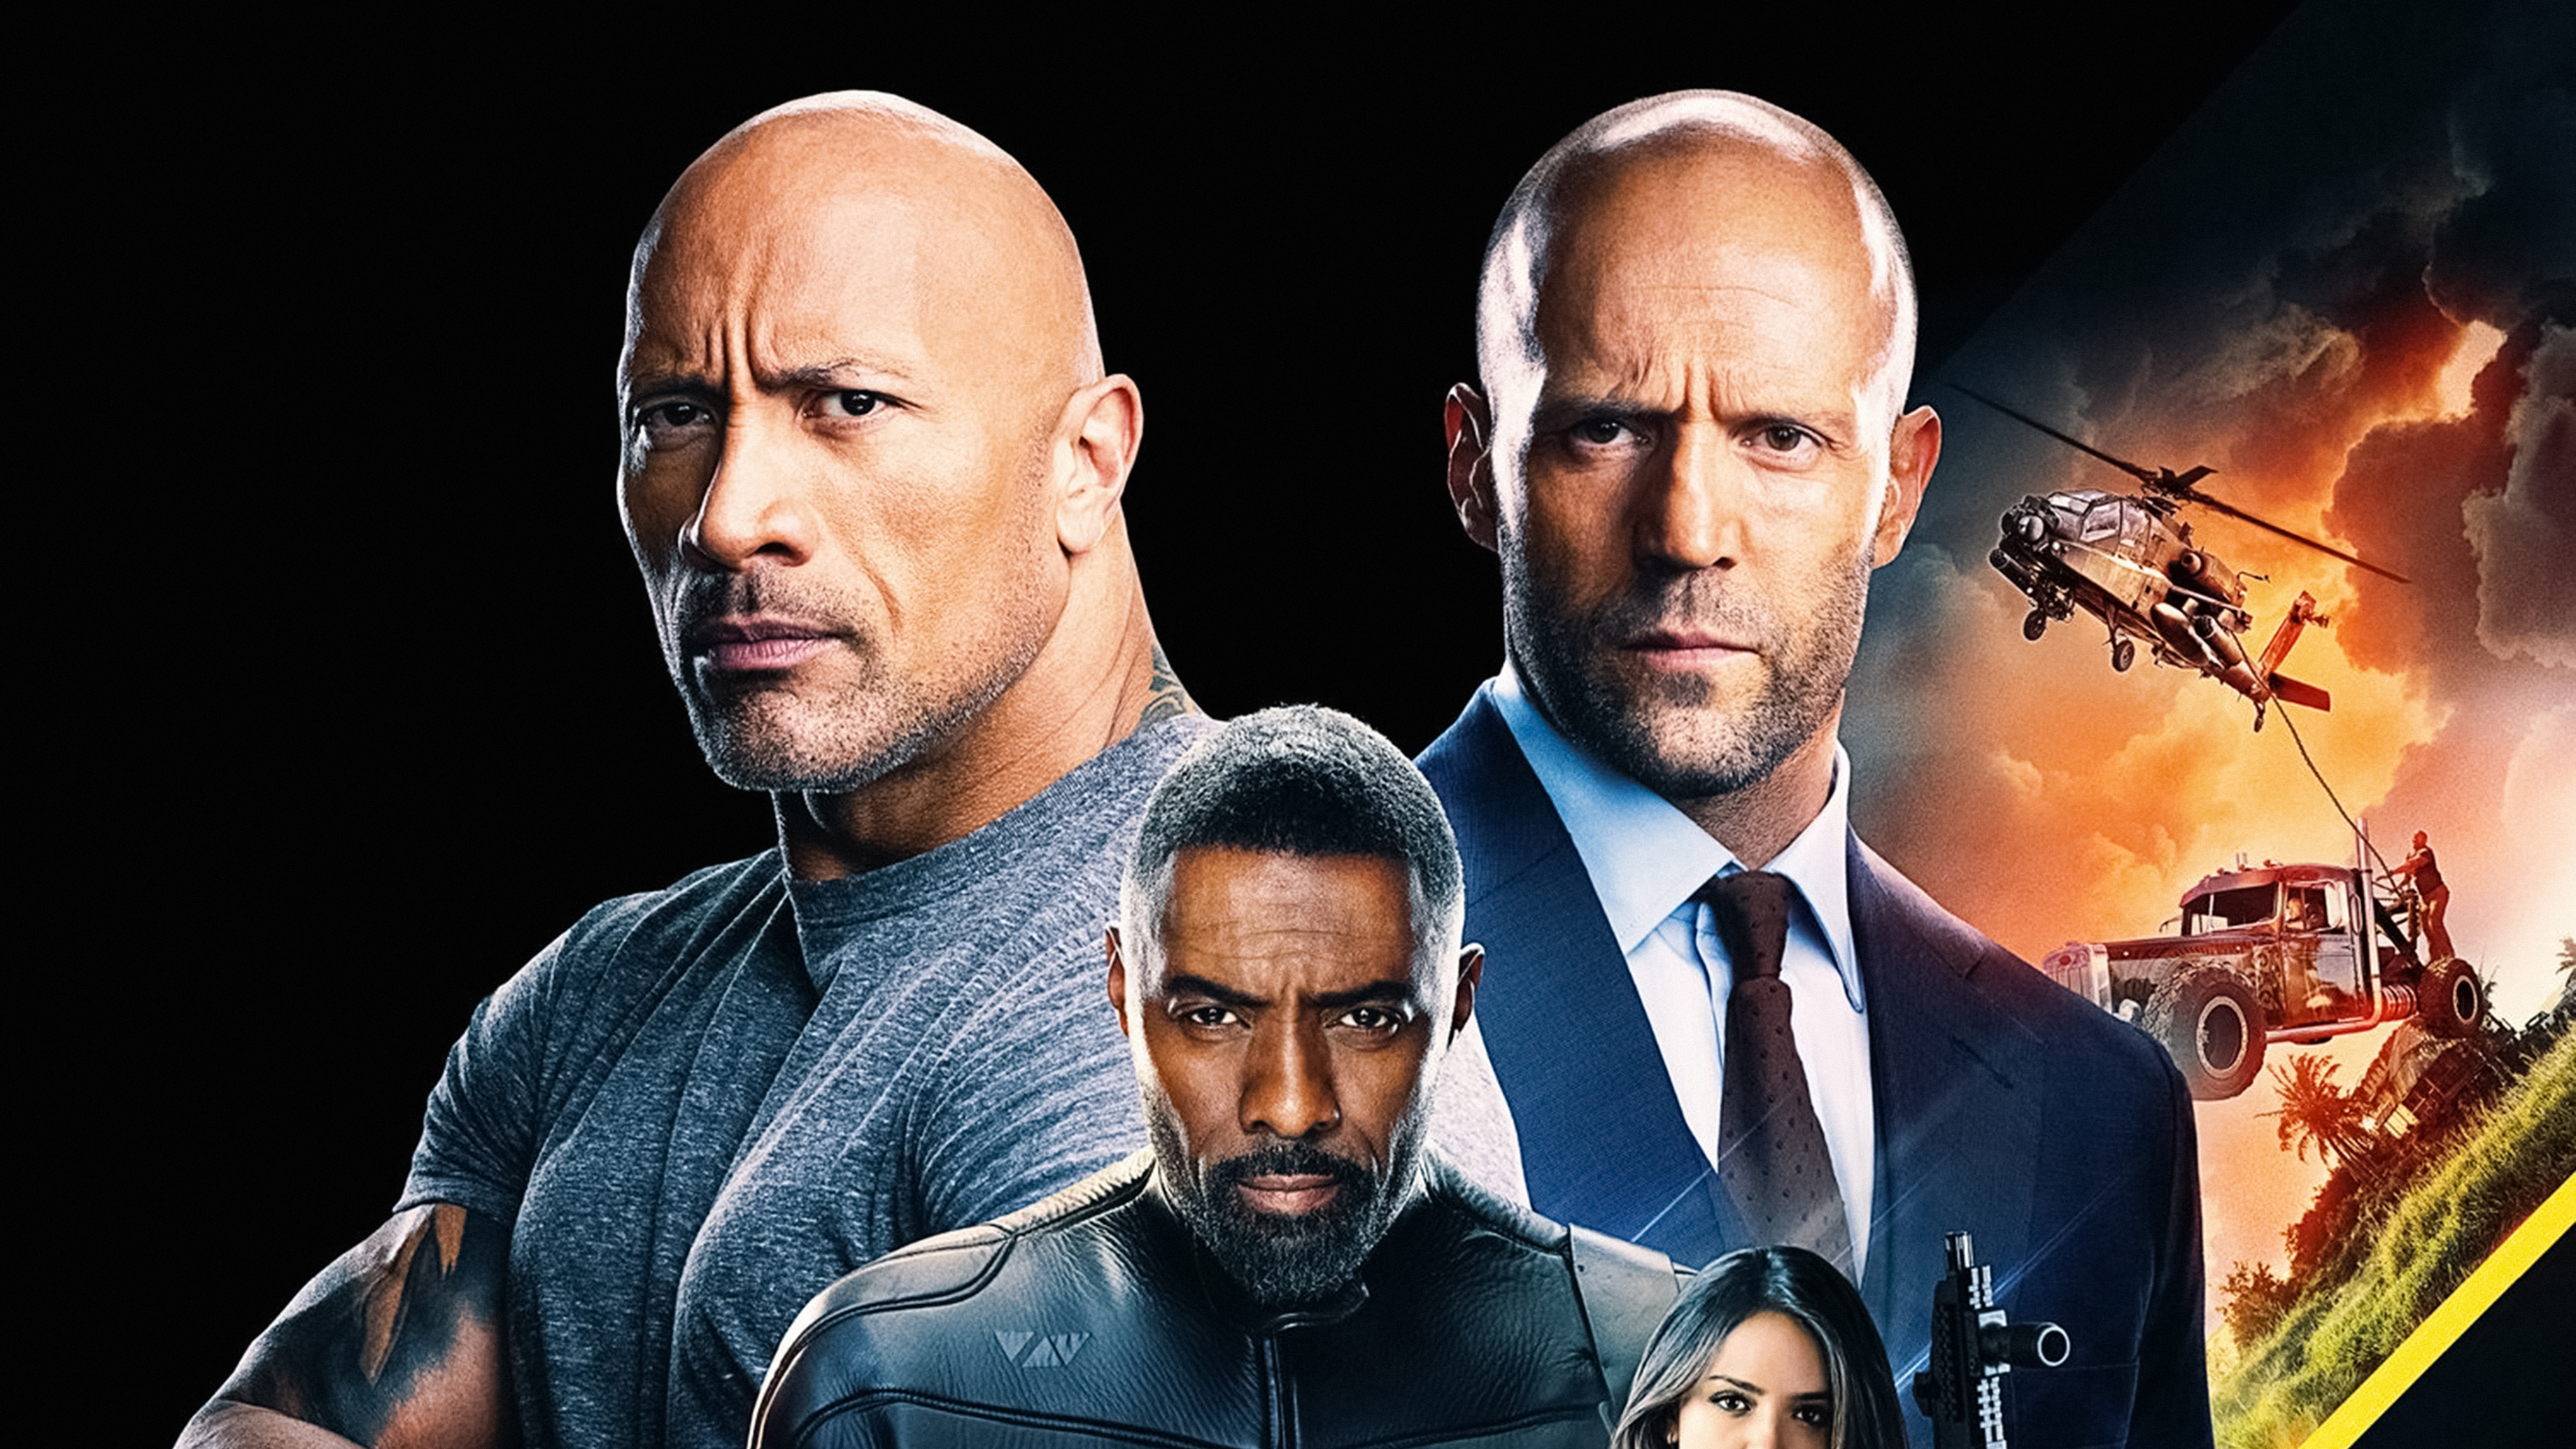 Hobbs And Shaw 2019 4k, HD Movies, 4k Wallpapers, Images, Backgrounds